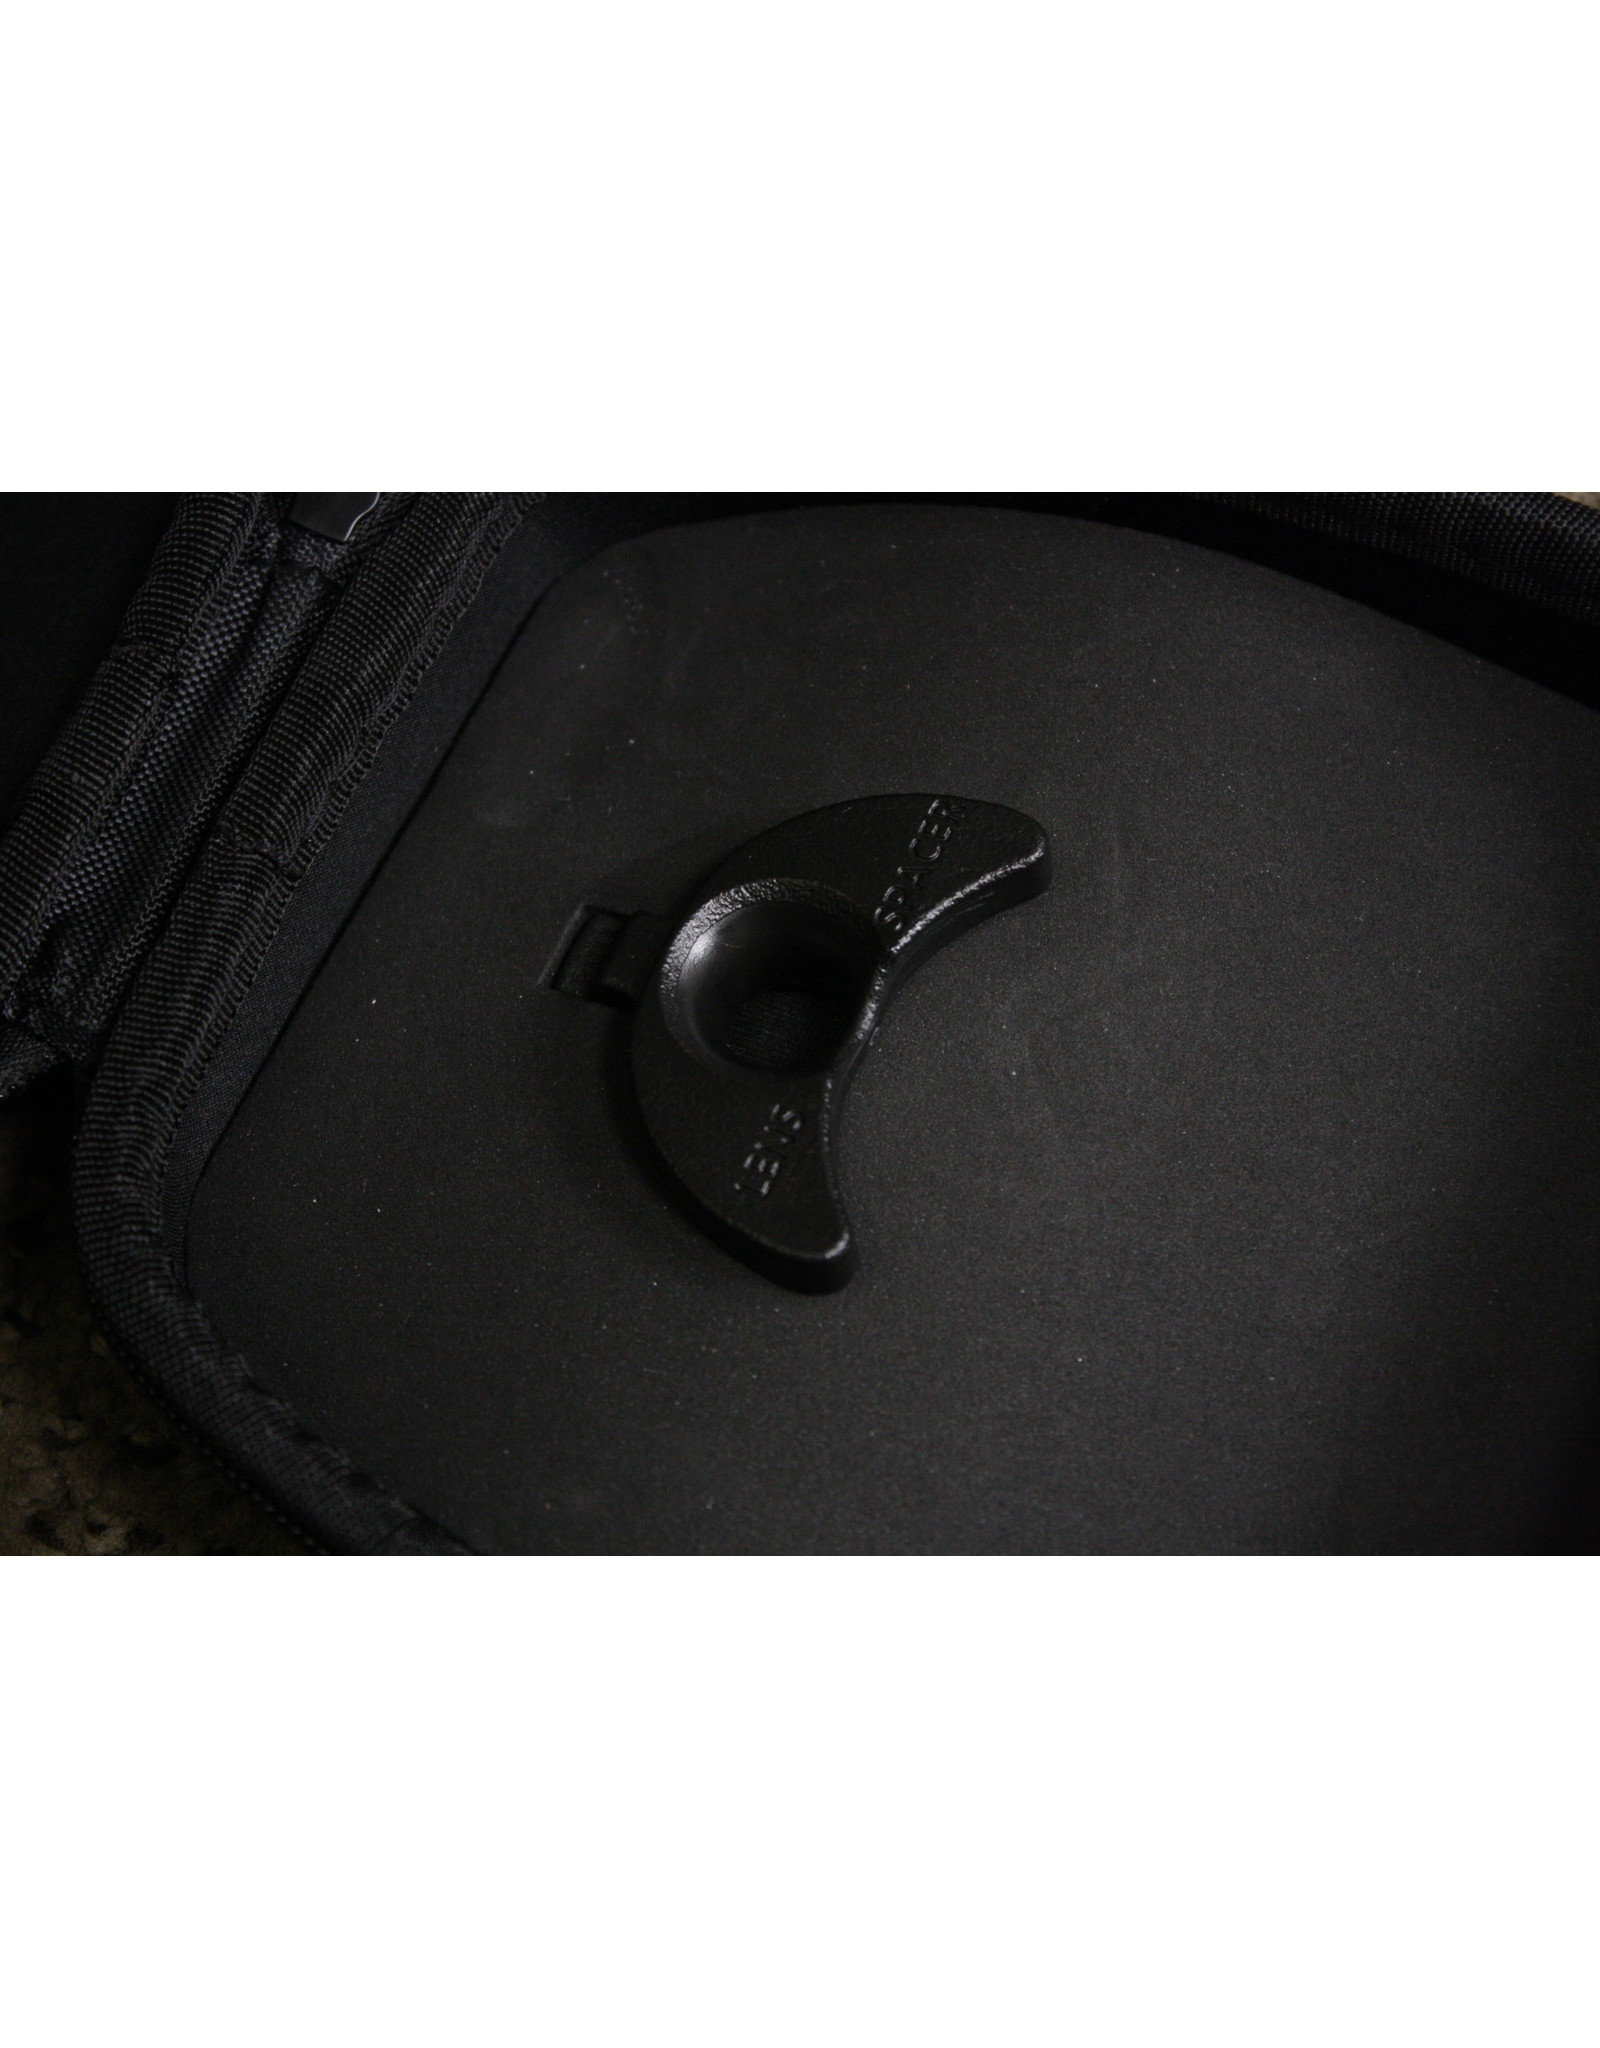 Carson Carson Carry Case for Hook-Upz Phone Holder